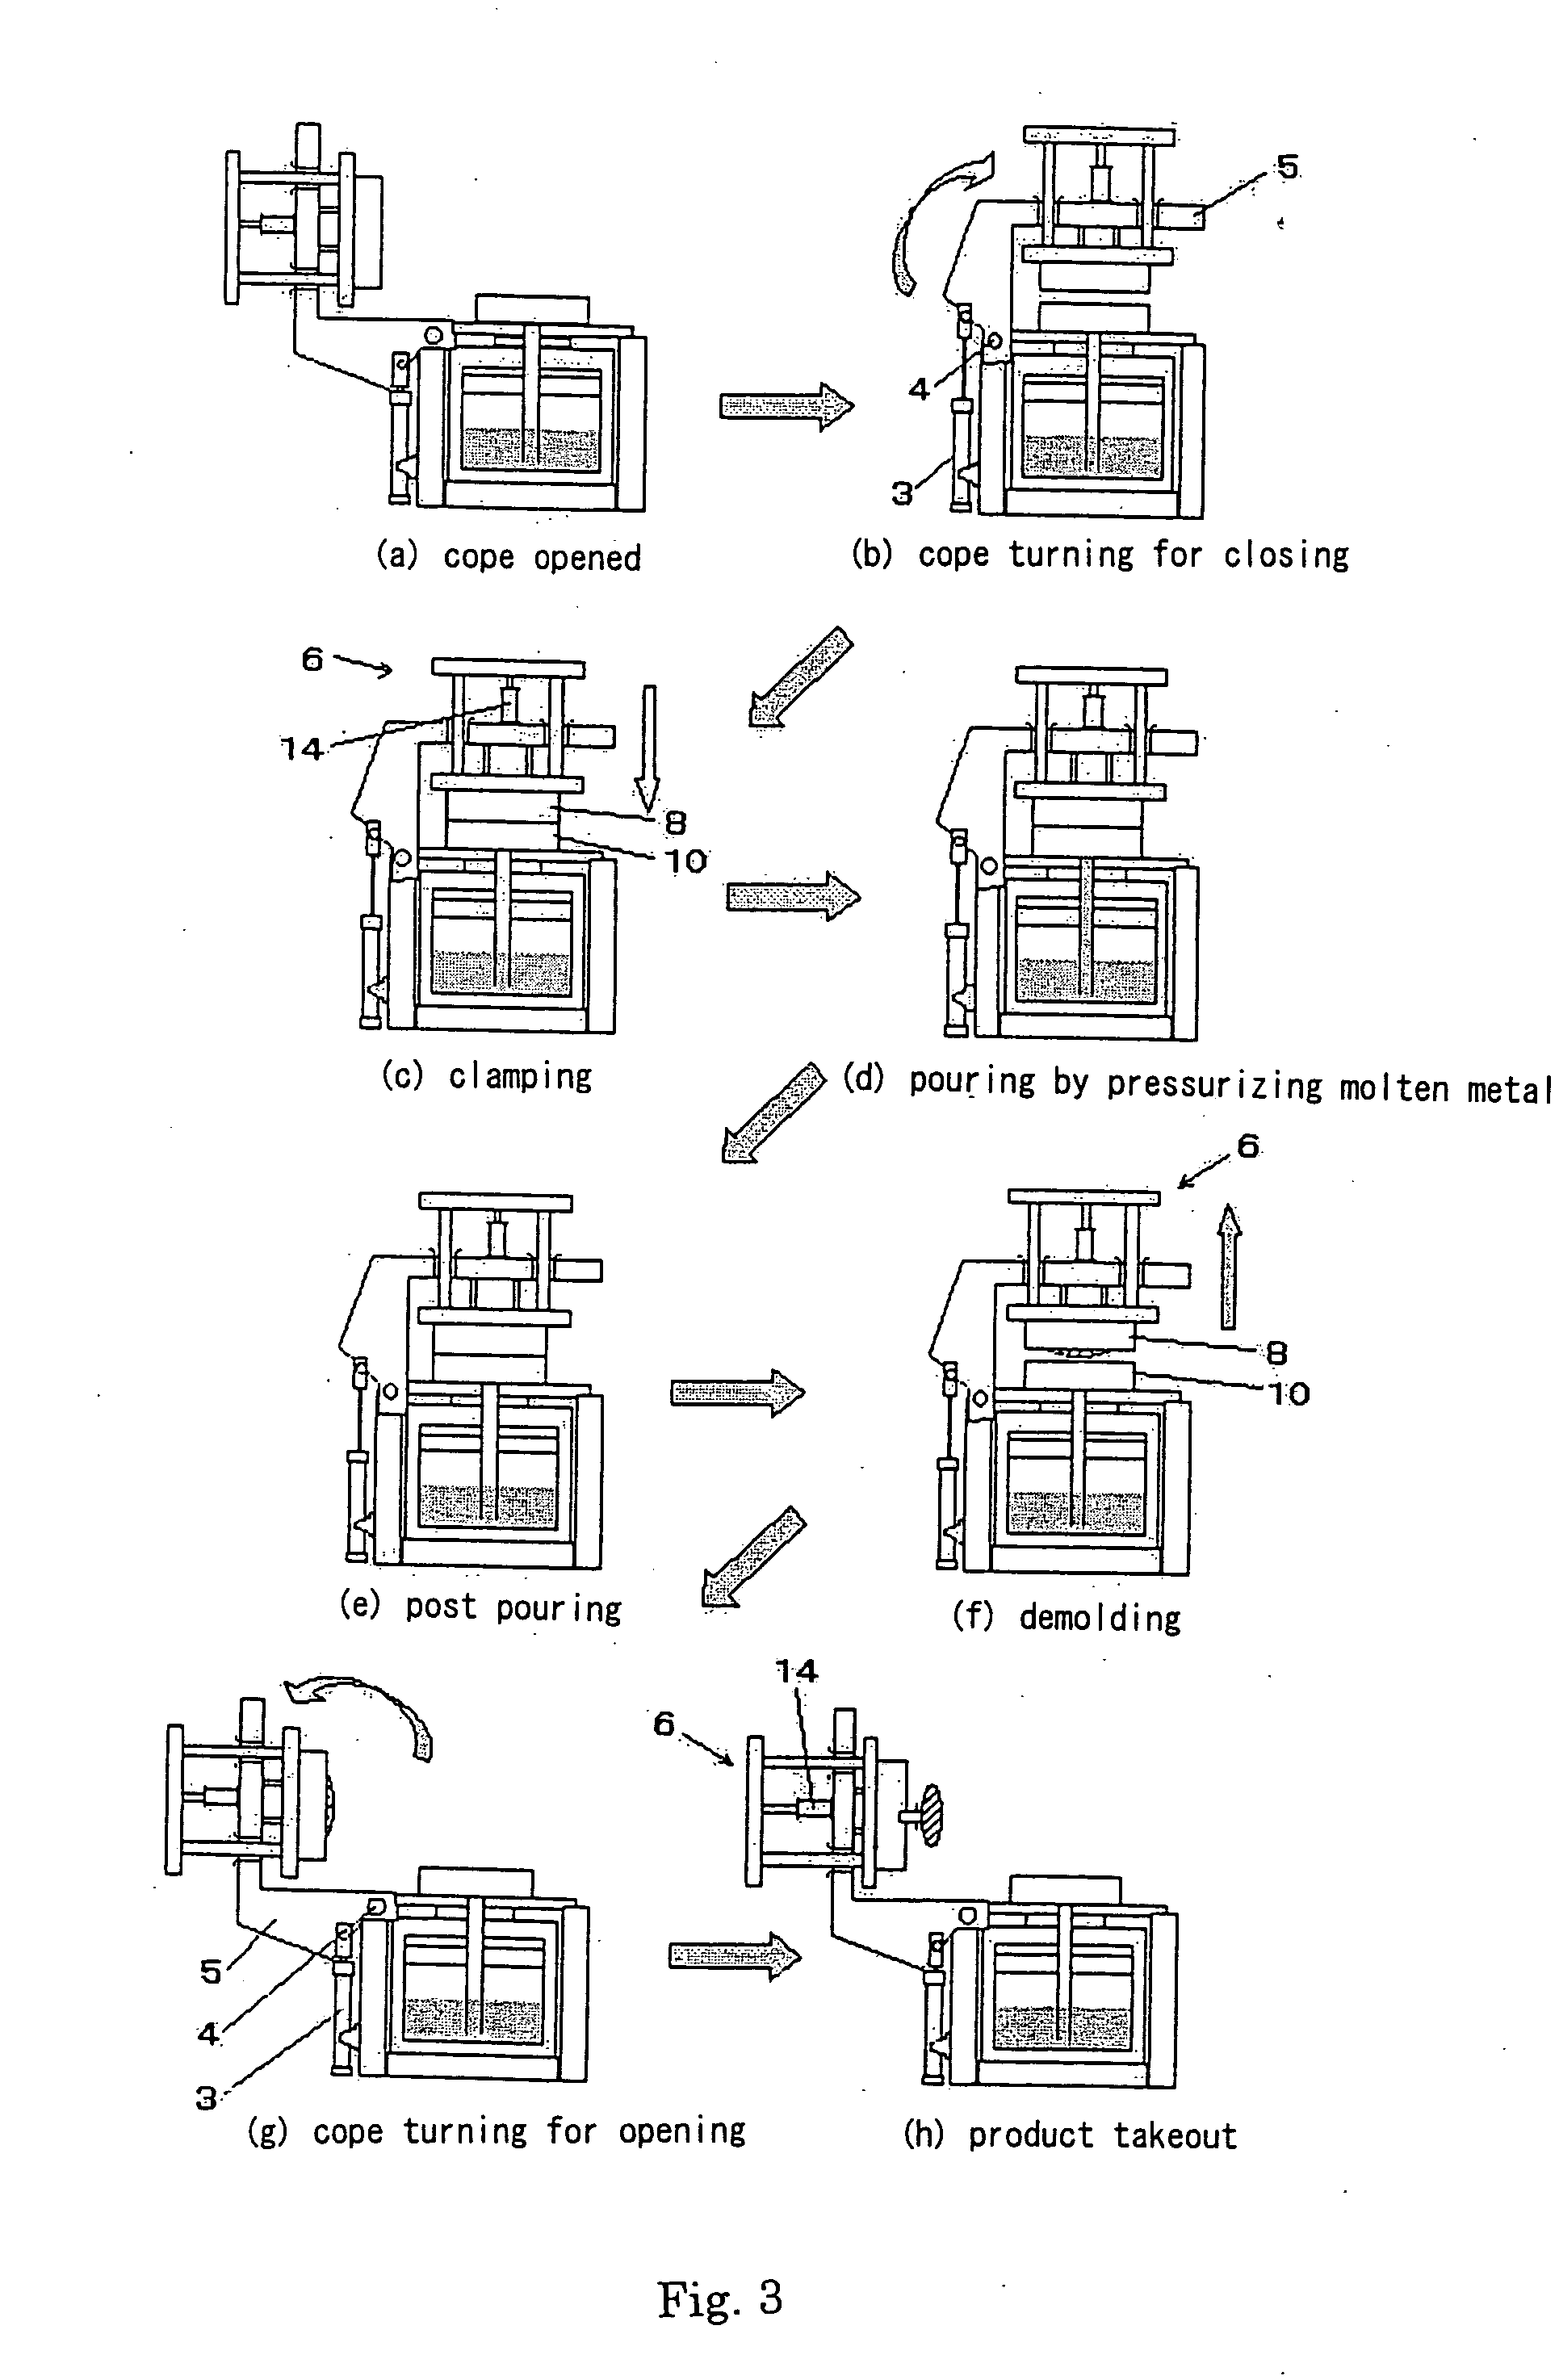 Metal Mold Casting Device Using Metal Cope And Metal Drag And Device For Moving Metal Cope Relative To Metal Drag